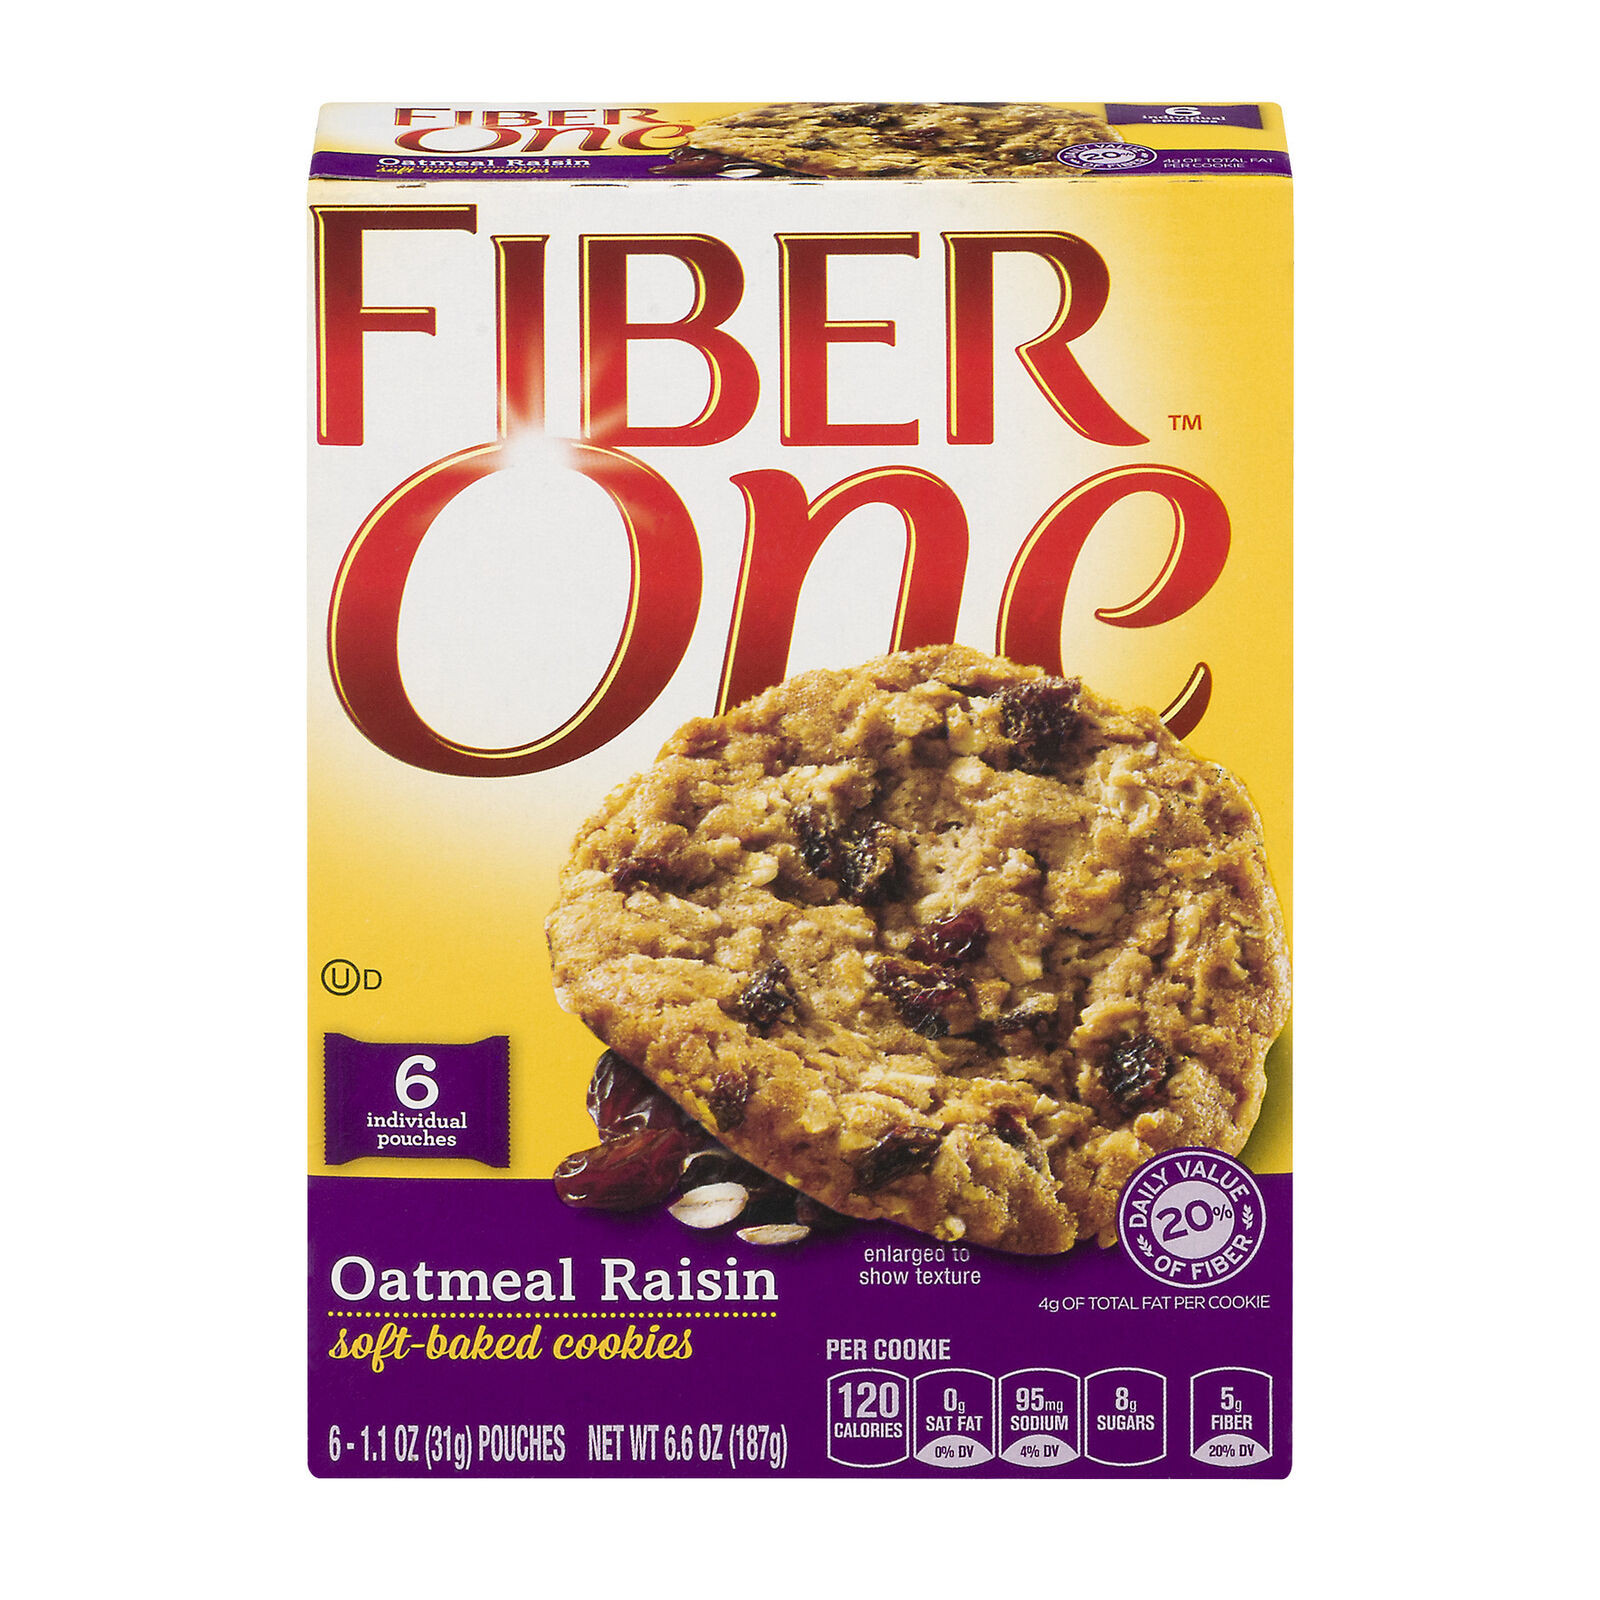 Fiber In Oatmeal Cookies Awesome Fiber E Oatmeal Raisin soft Baked Cookies 6 Count